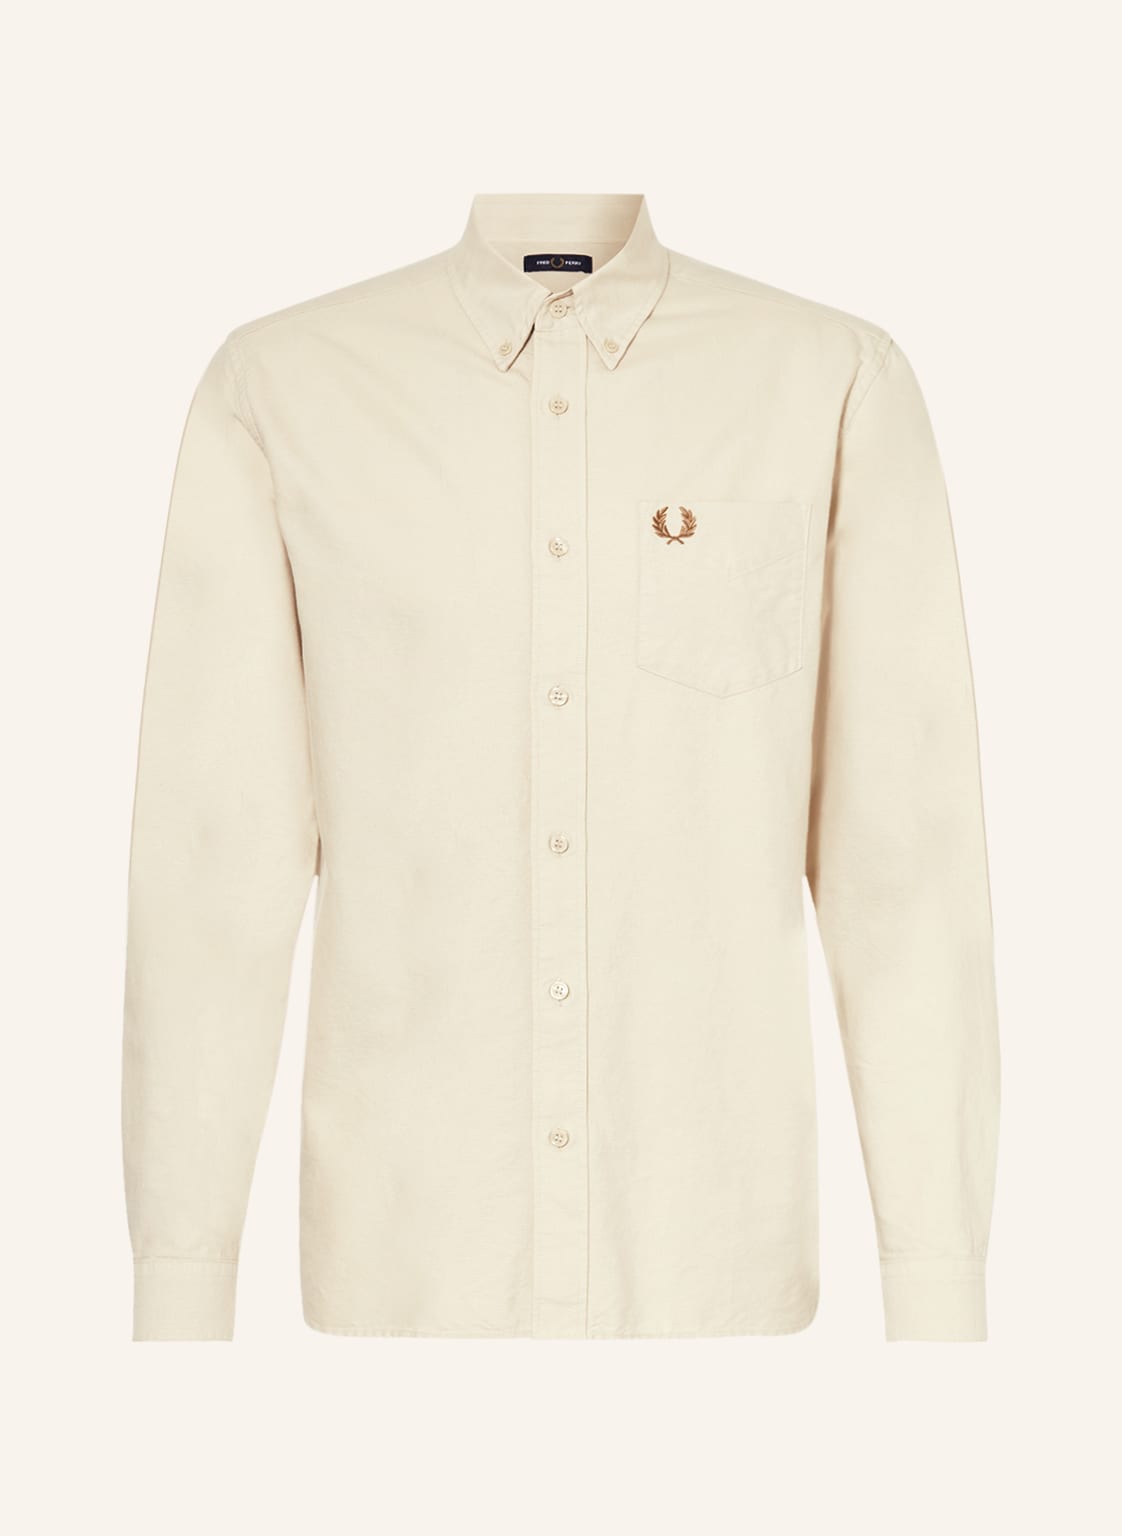 Fred Perry Hemd Regular Fit beige von Fred Perry